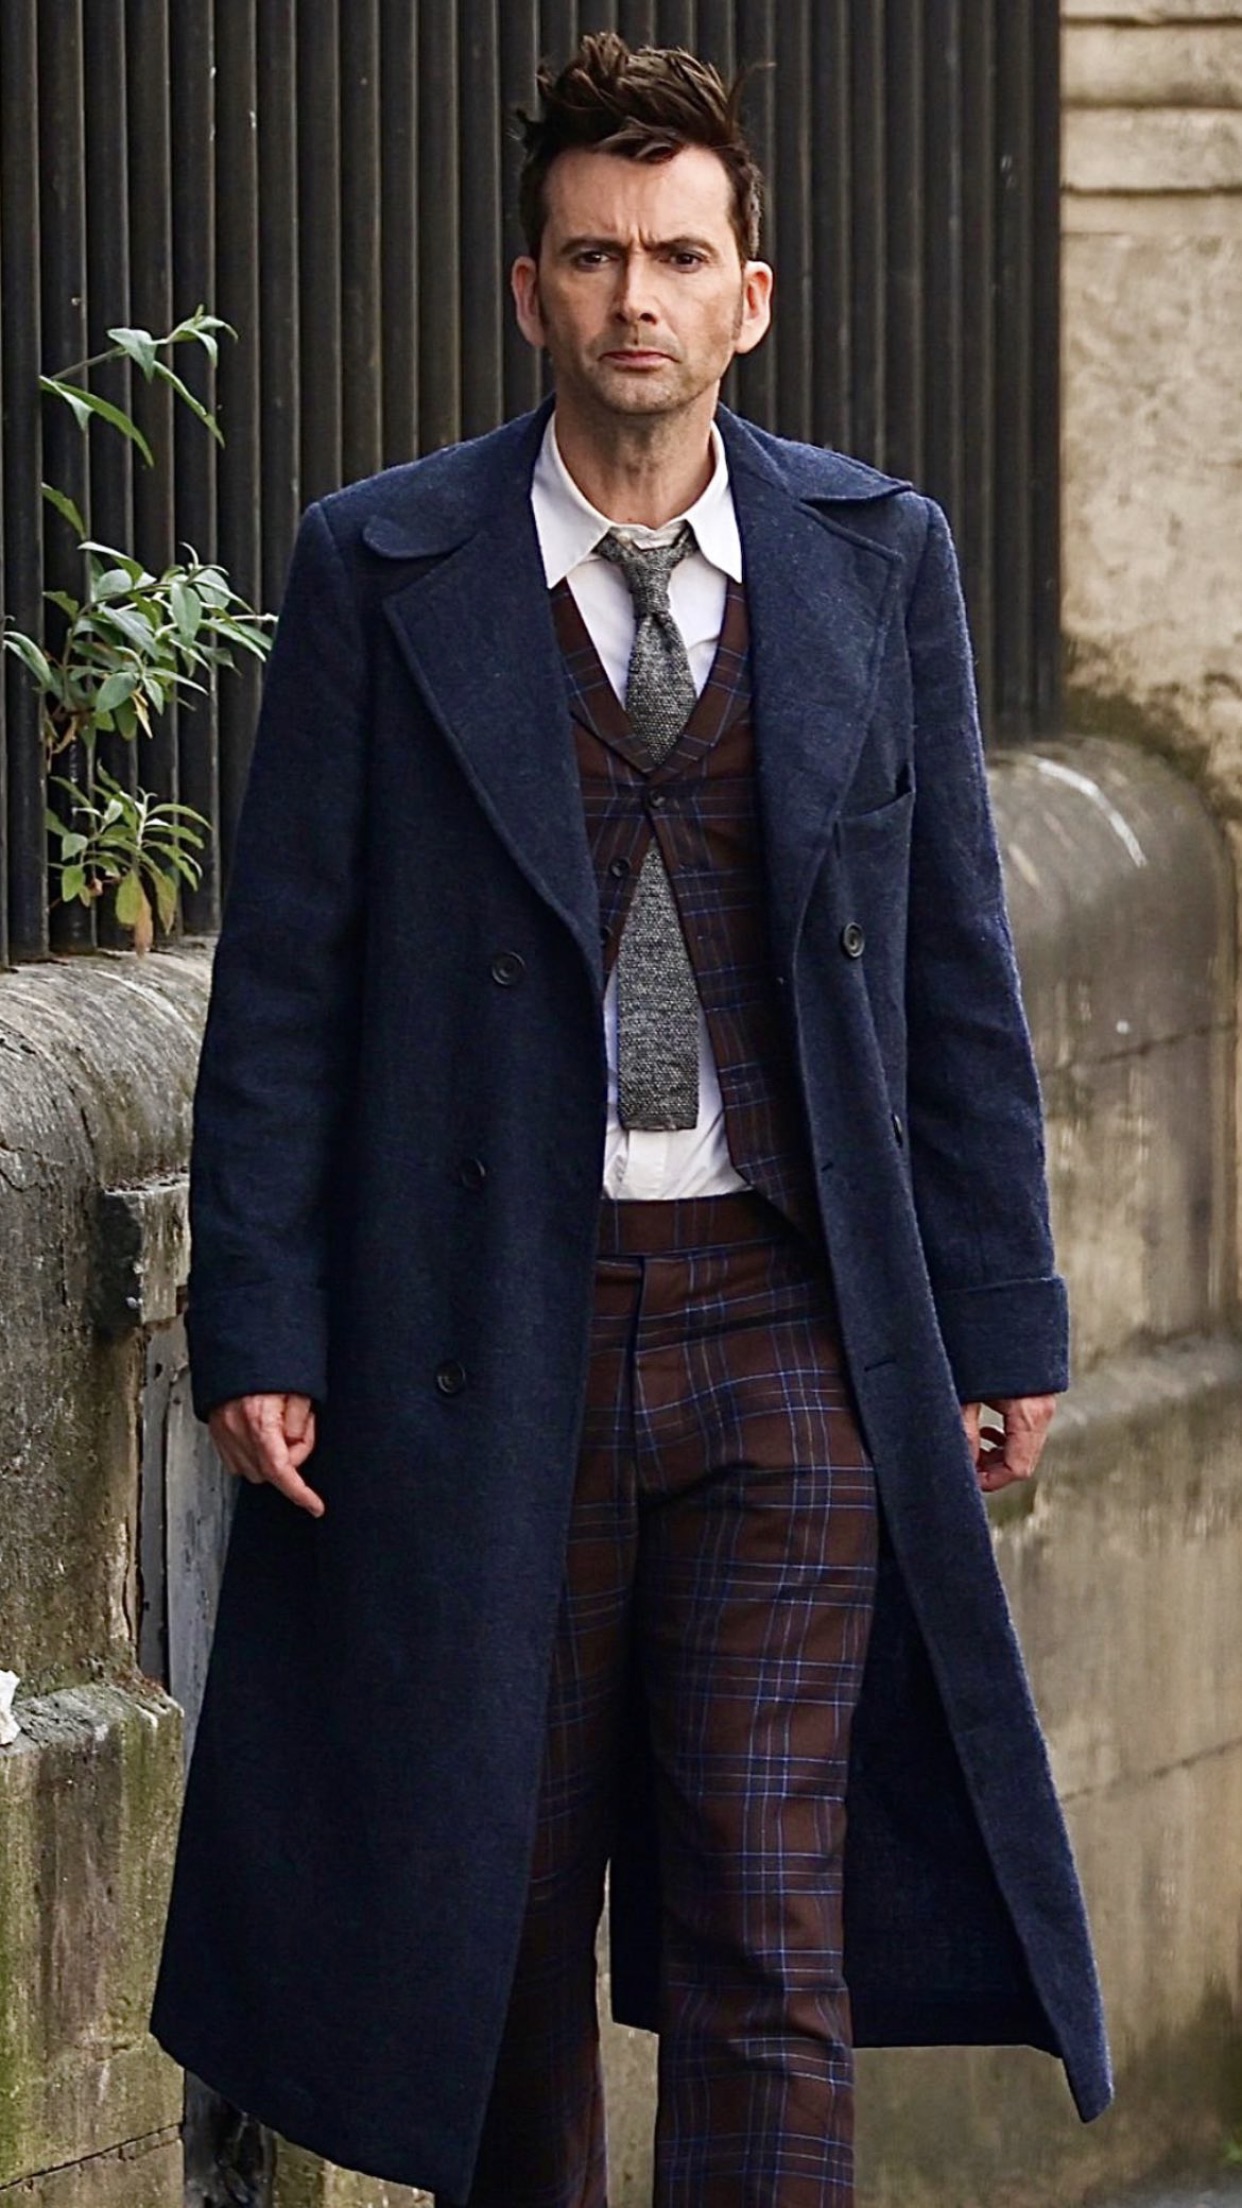 DOCTOR WHO Fourteenth Doctor / 60th Anniversary / David Tennant costume |  RPF Costume and Prop Maker Community